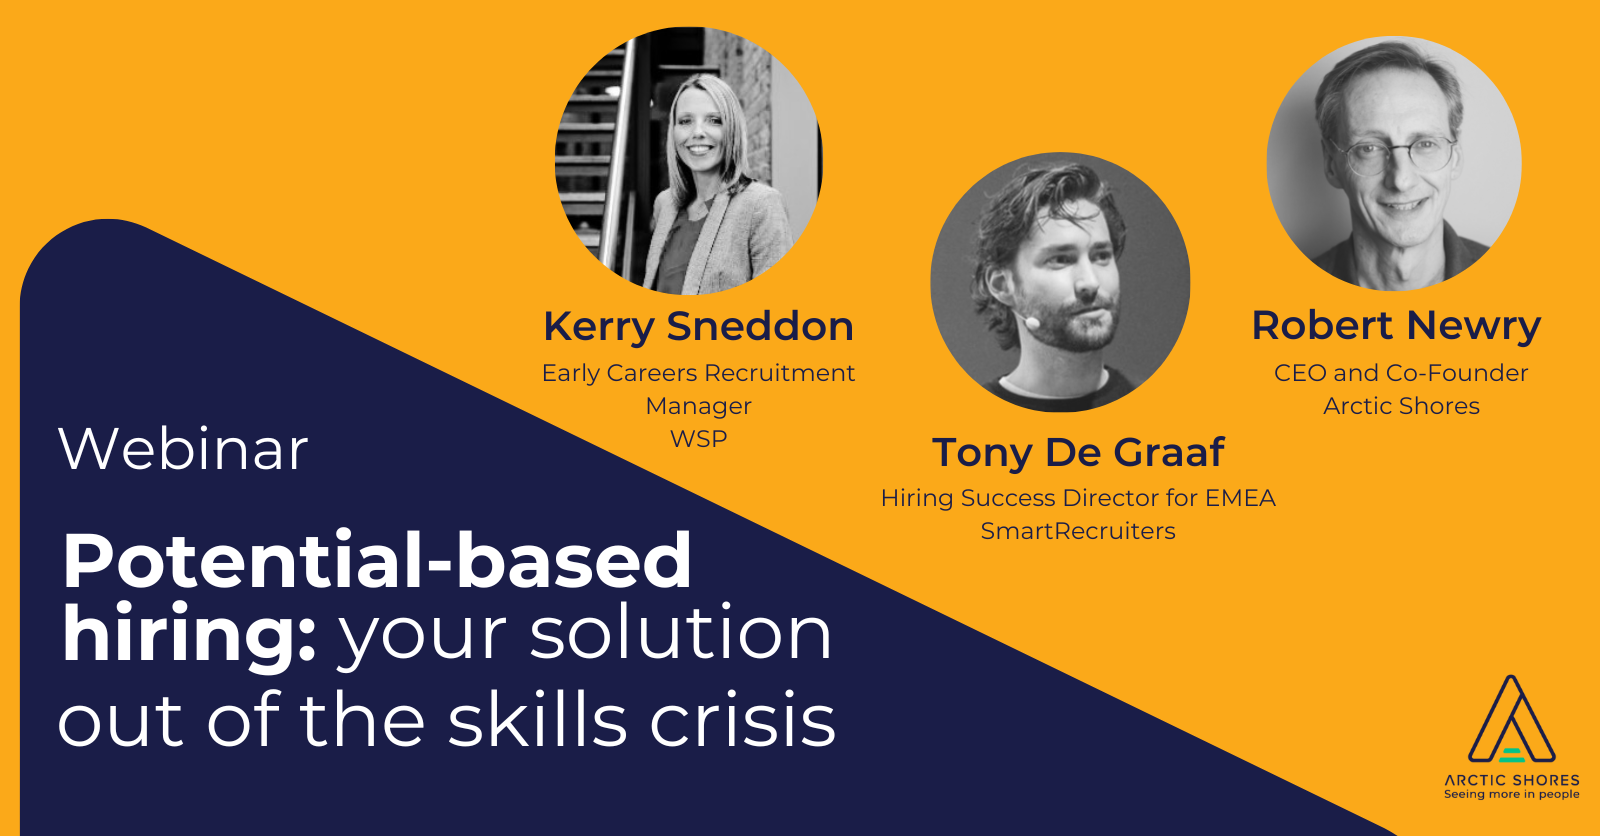 Webinar: Potential-based hiring: your solution out of the skills crisis